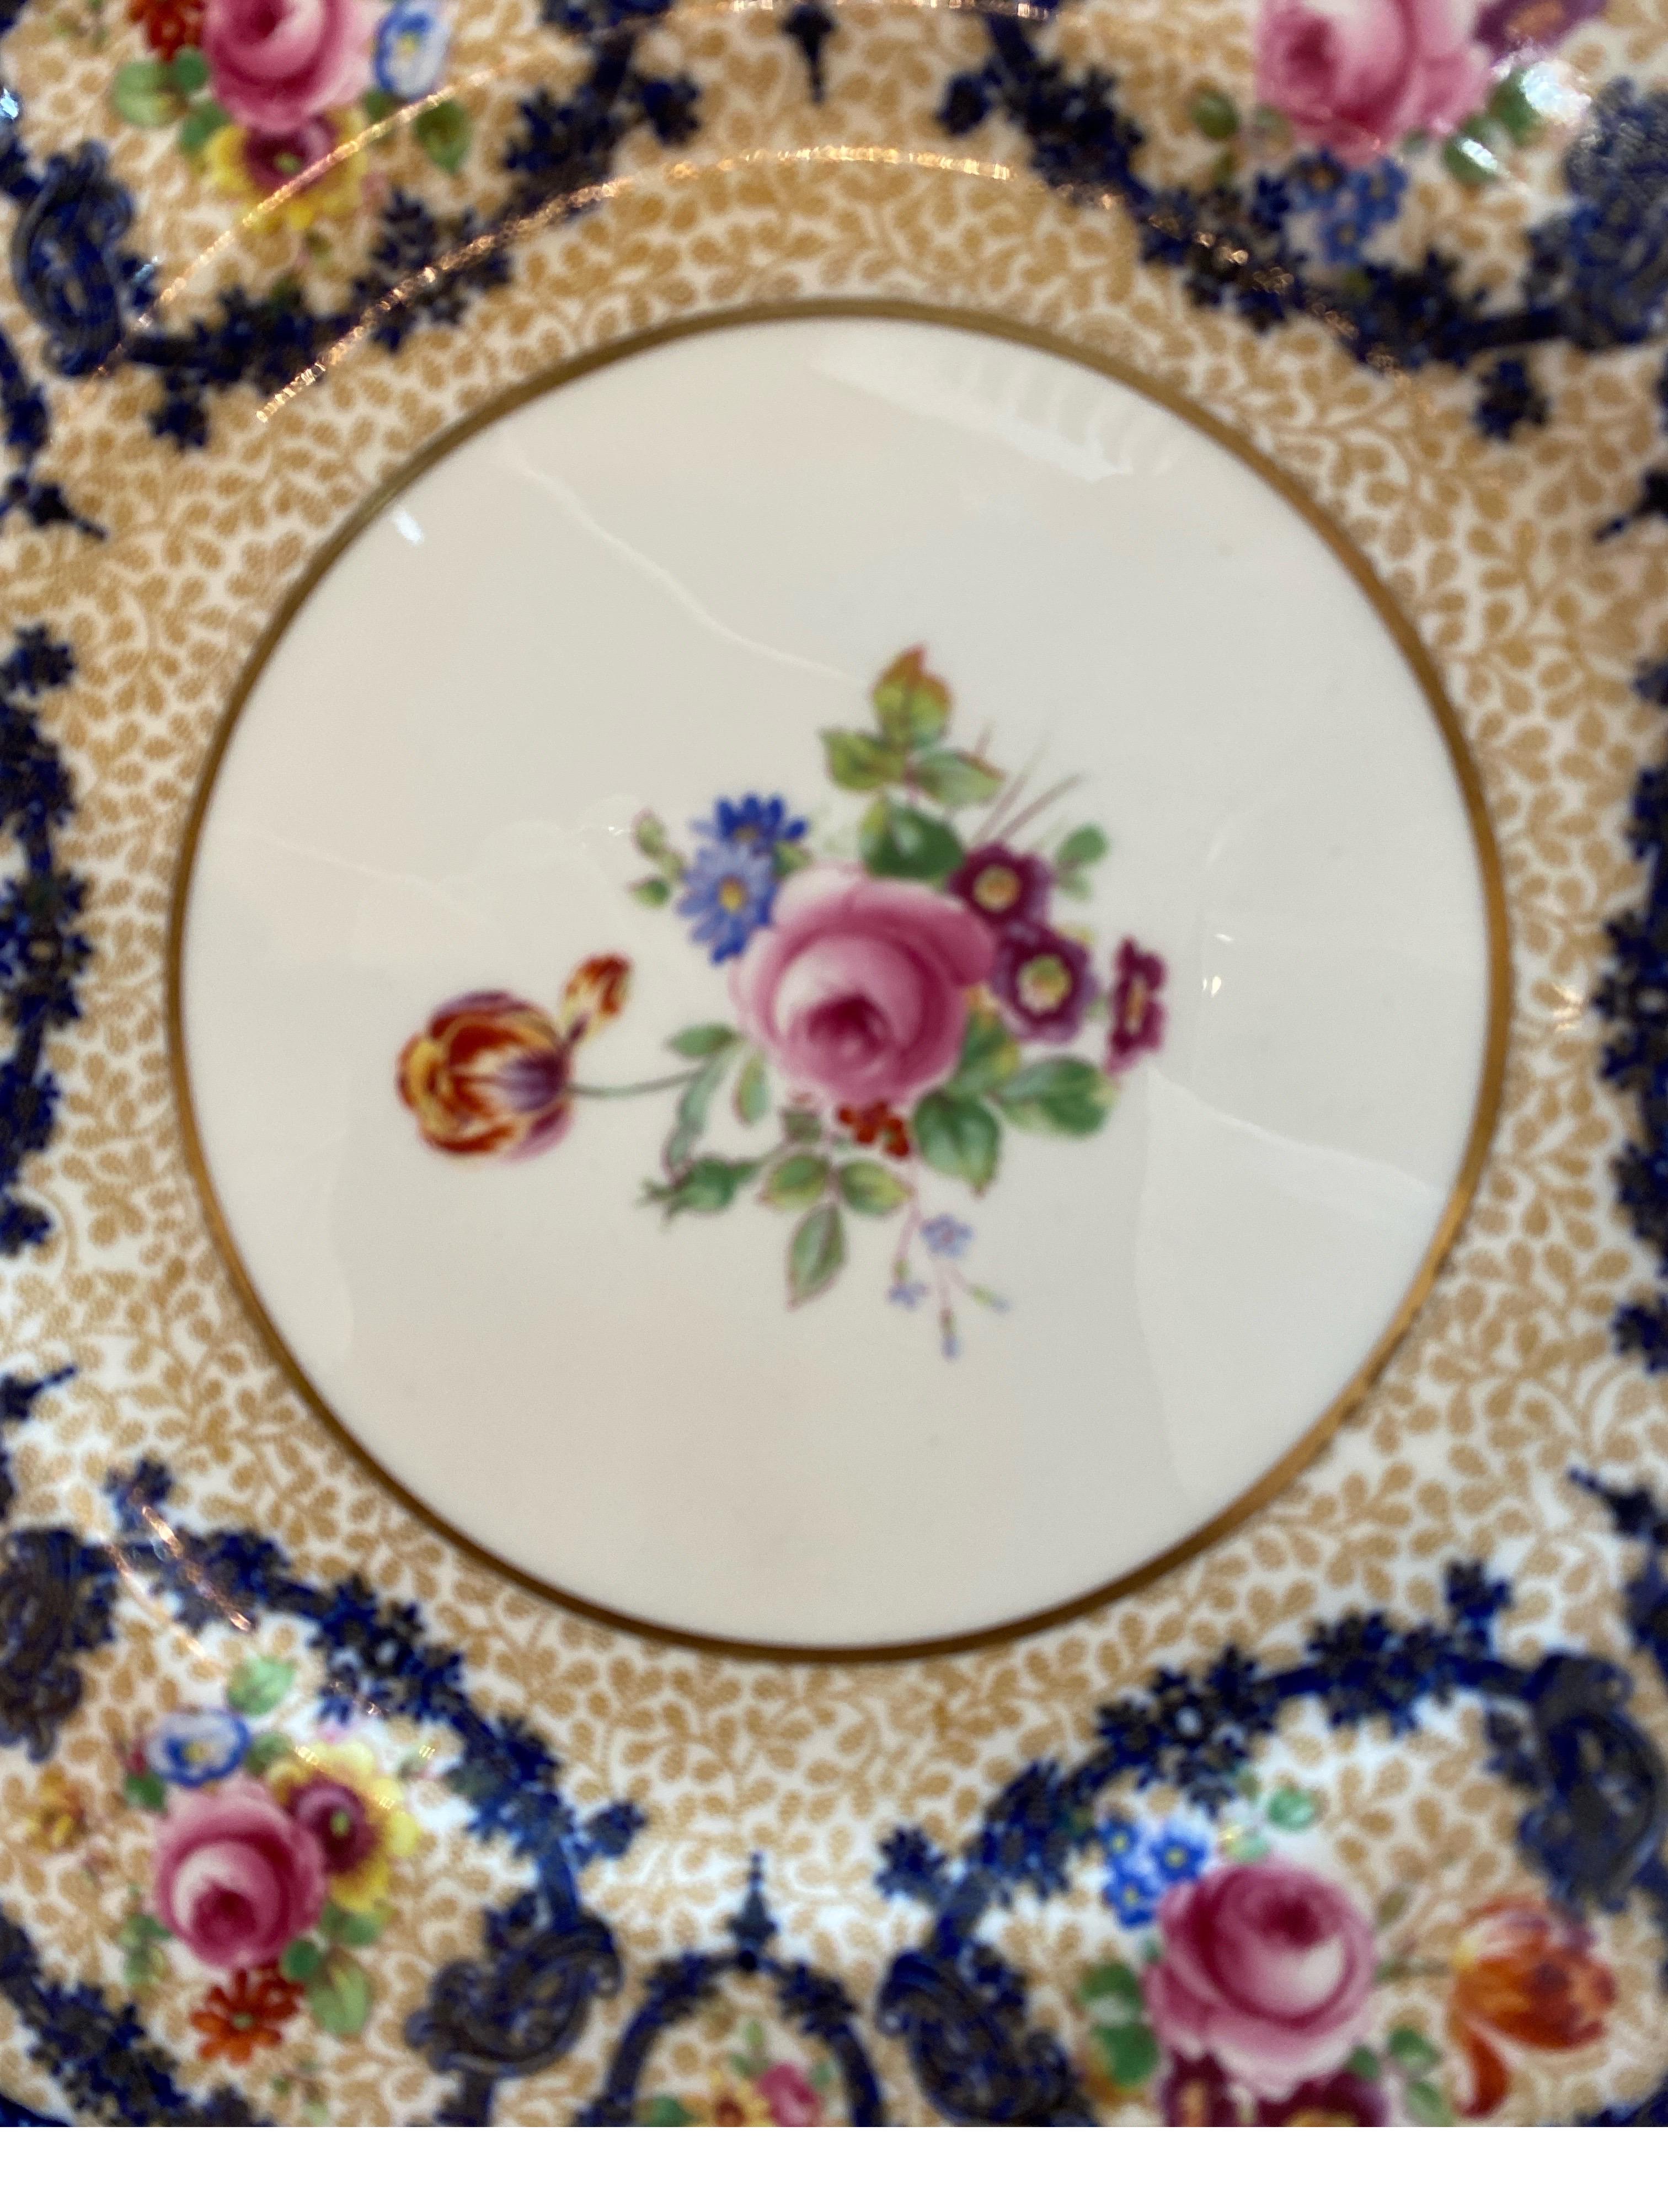 A Set of 10 Hand Painted Antique Service Plates by Royal Doulton Circa 1915 For Sale 2